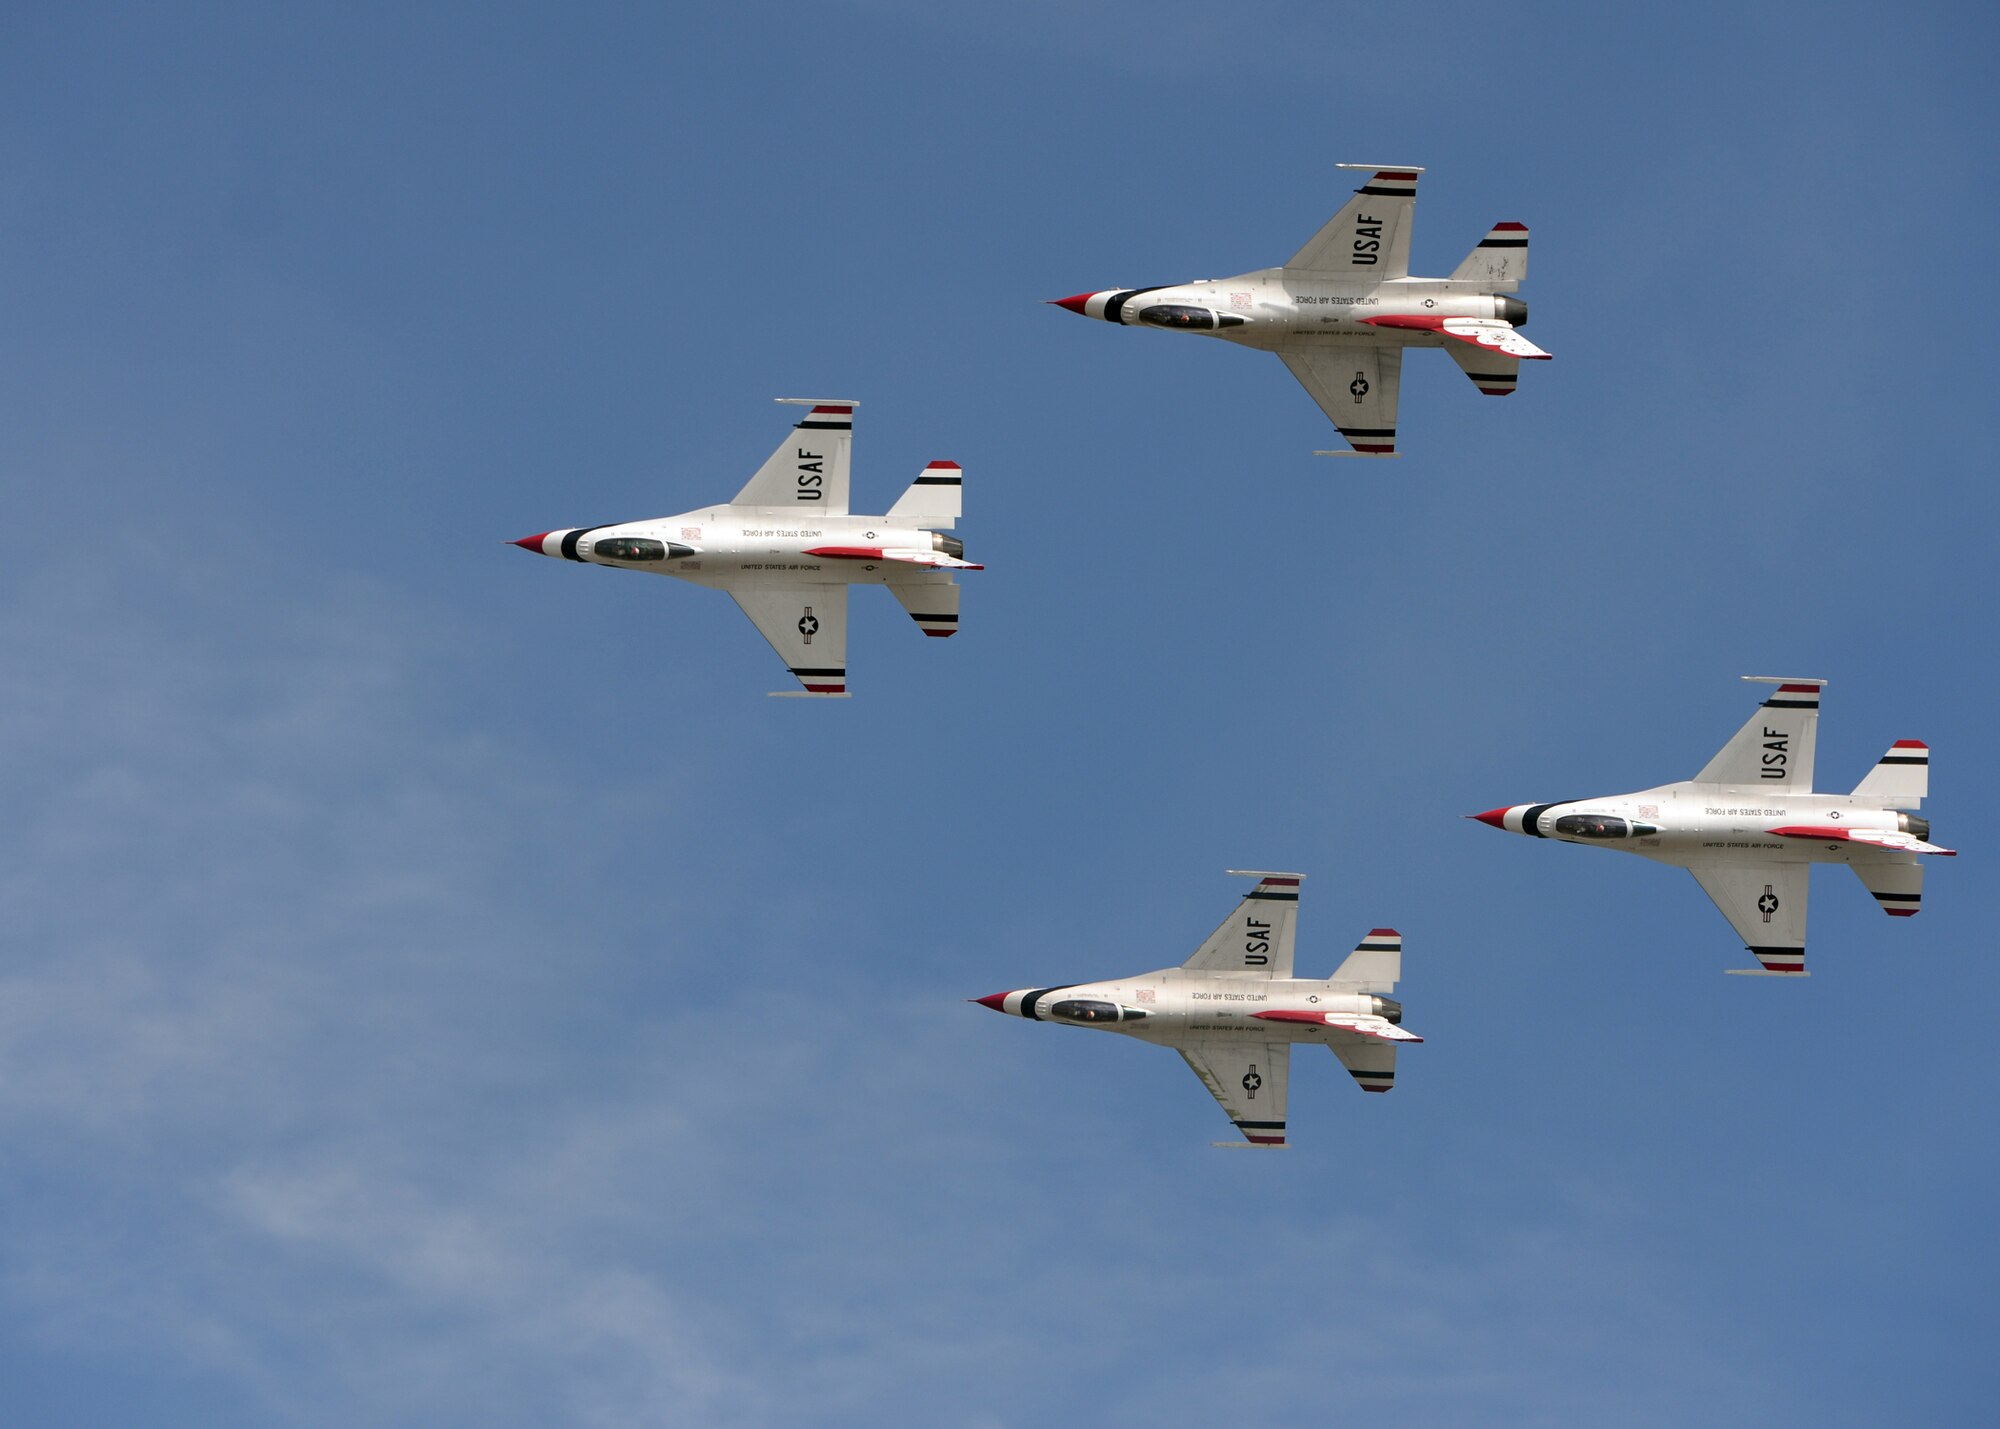 ALTUS AIR FORCE BASE, Okla. – U.S. Air Force Thunderbirds perform a diamond roll during the 2014 Wings of Freedom Open House, Sept. 12, 2014. The open house allowed the public to view several Air Force aircraft and helicopters, watch civilian aerial demonstrations and experience aerial performances from the Air Force Thunderbirds and the U.S. Air Force Academy Wings of Blue parachuting team. (U.S. Air Force photo by Senior Airman Franklin R. Ramos/Released)